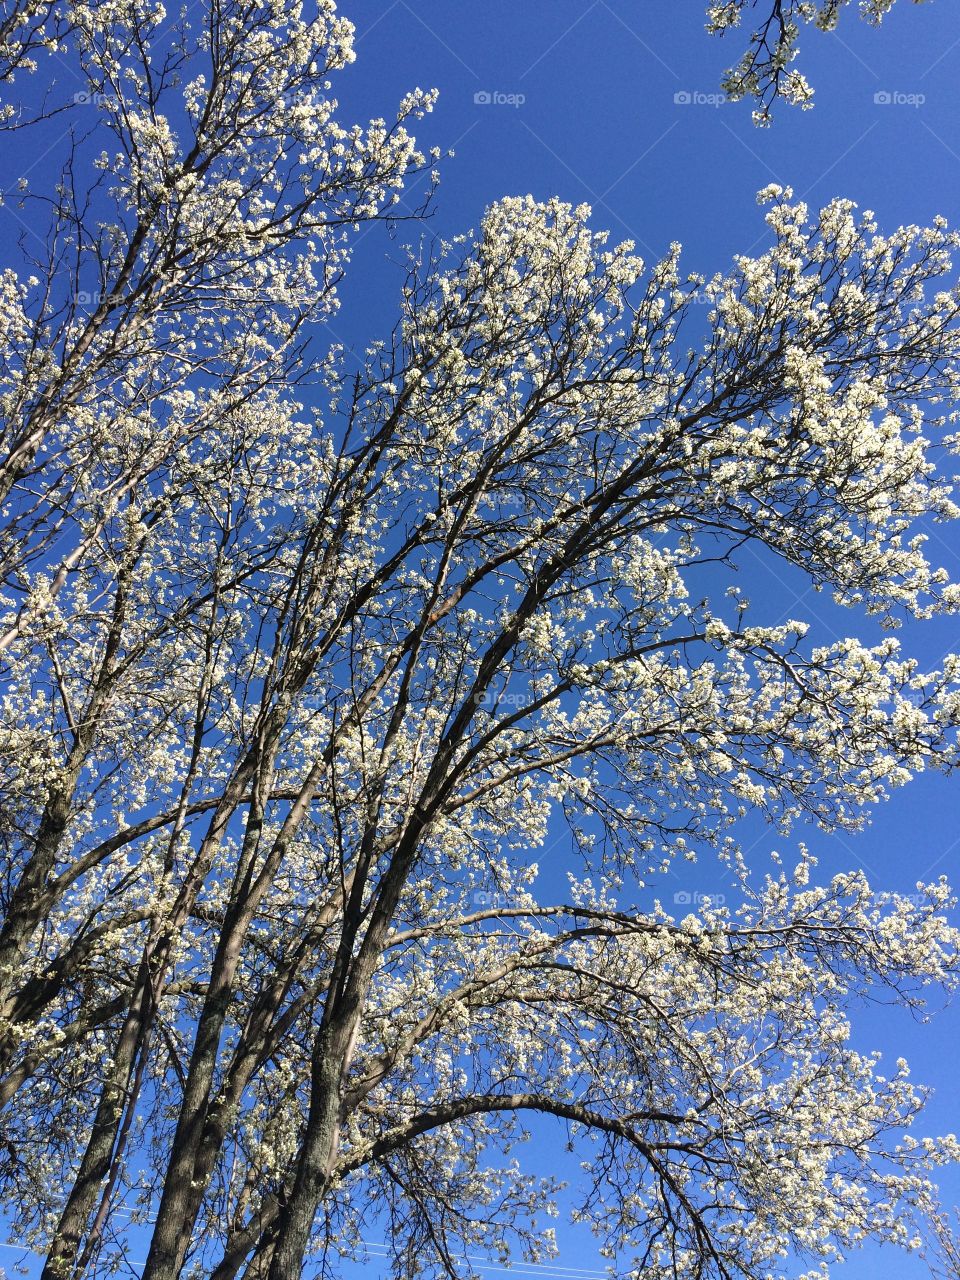 Blooming pear trees